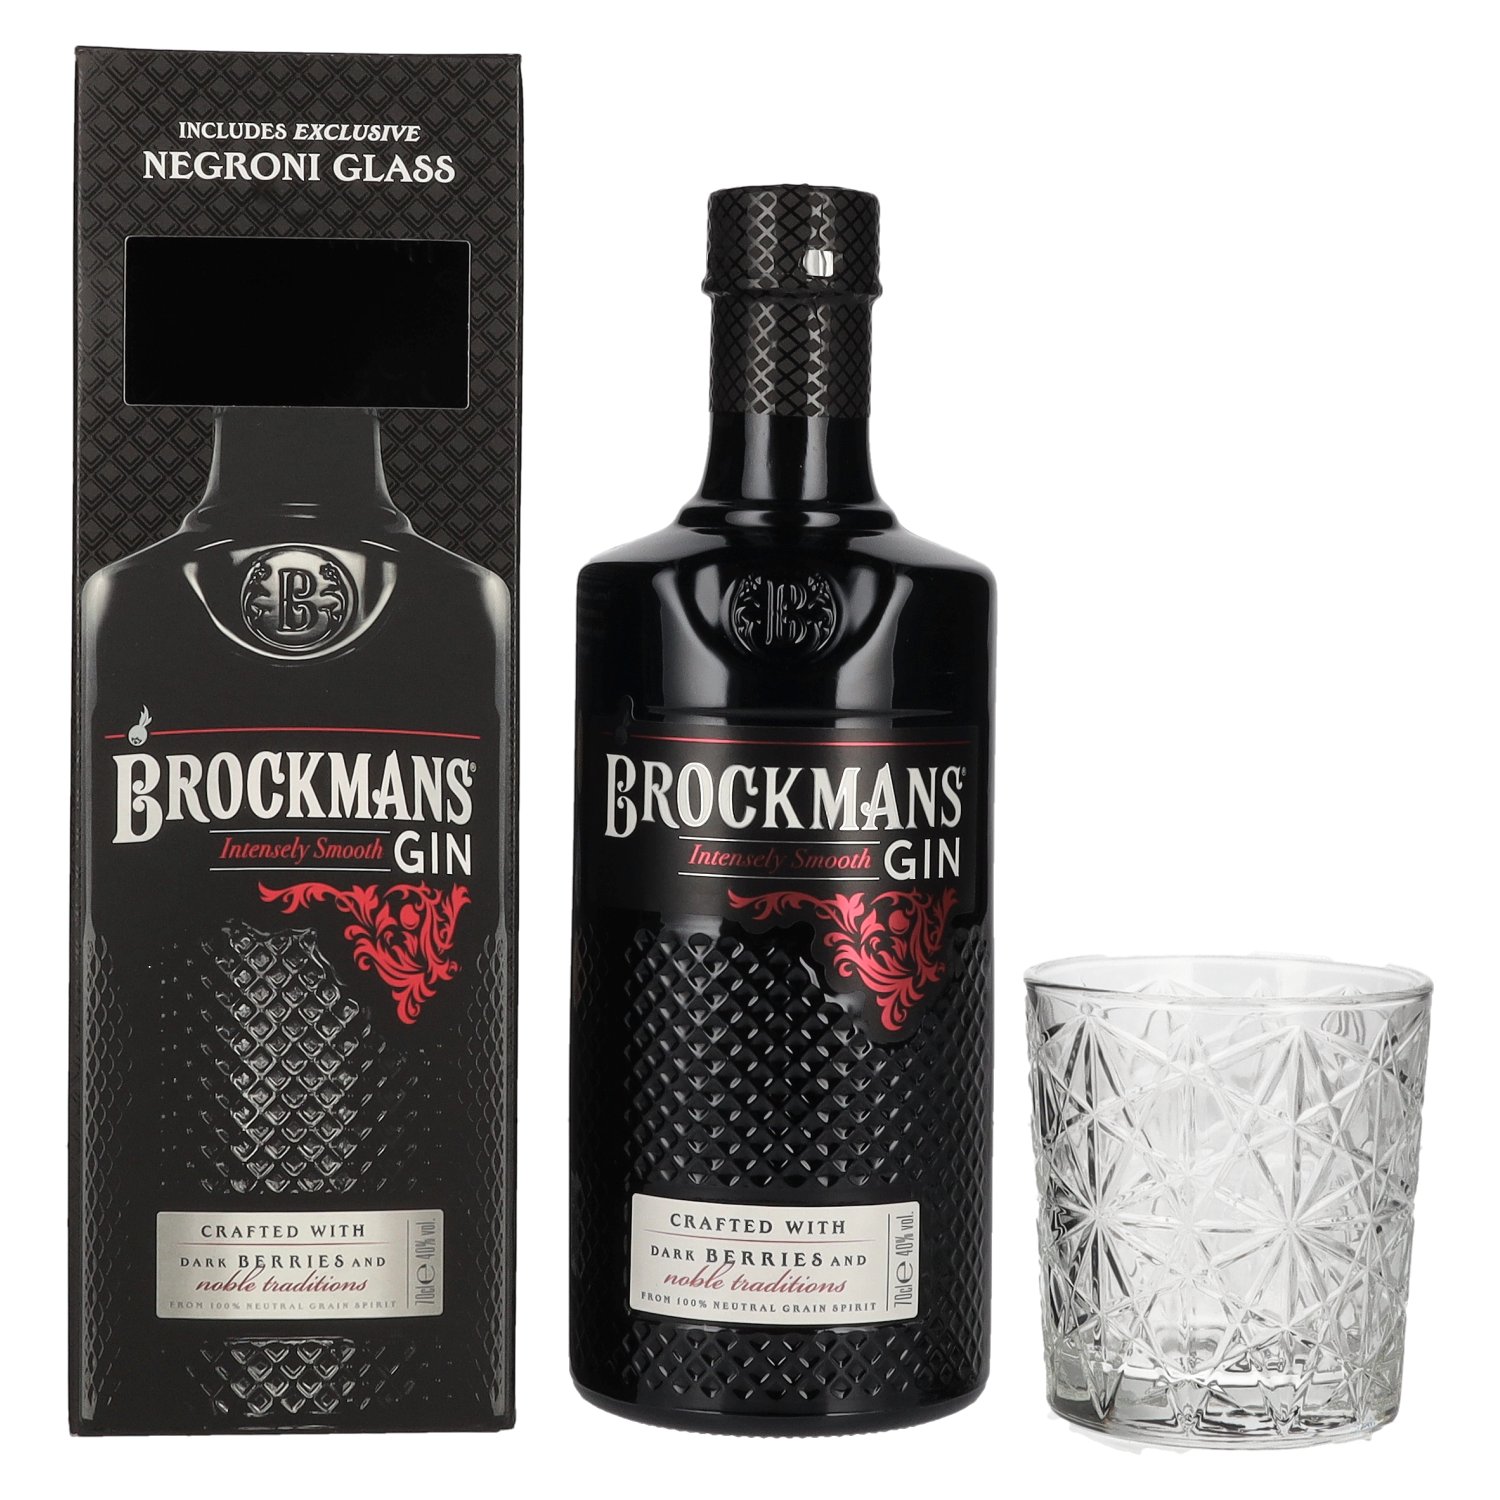 glass PREMIUM Brockmans with Vol. 40% GIN Smooth Intensly 0,7l Giftbox in